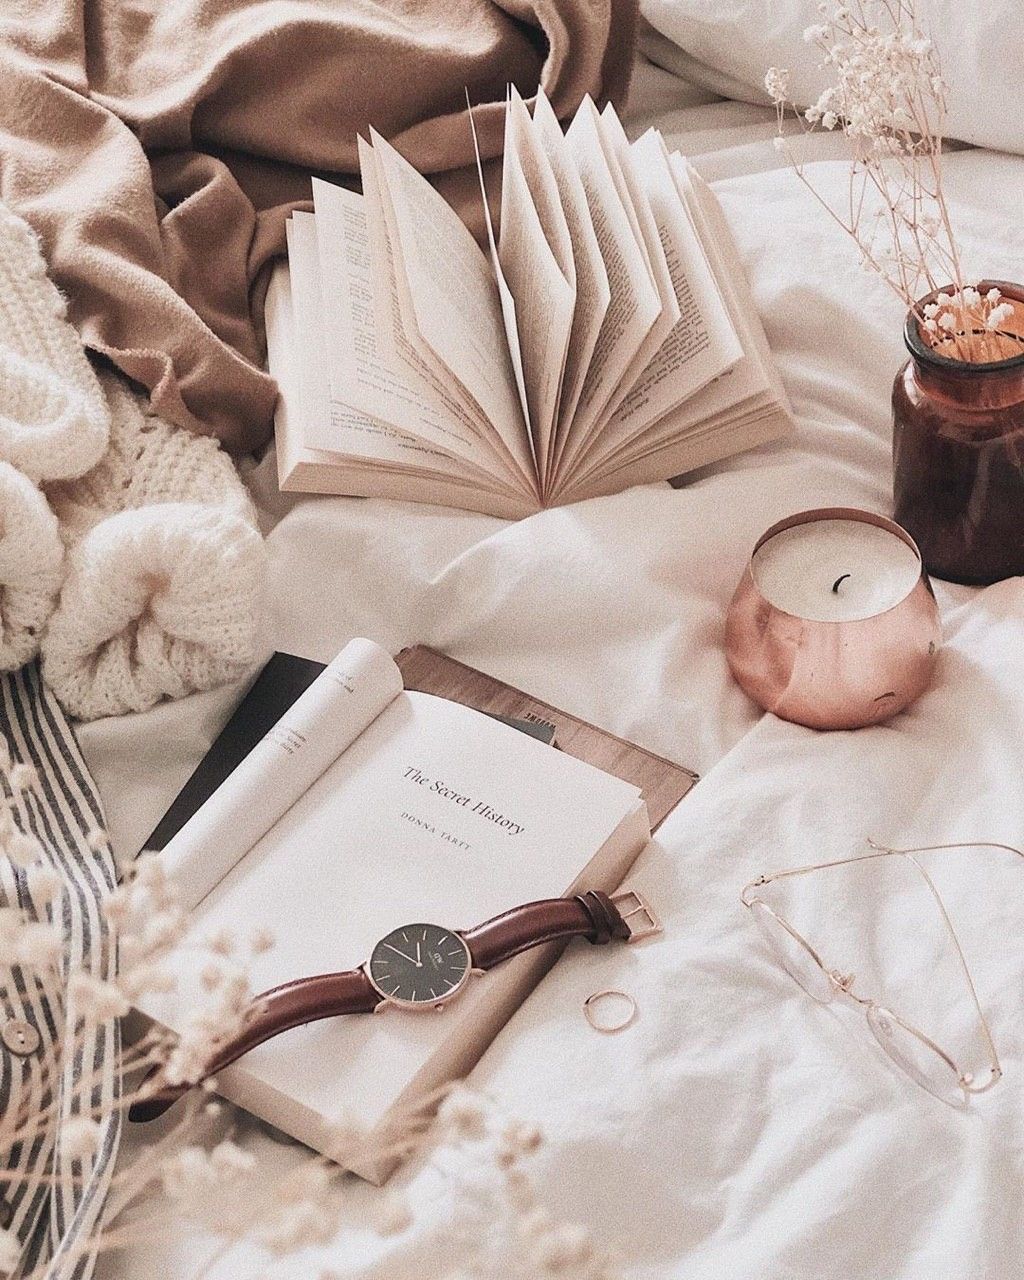 A book, a watch, a candle, glasses, and a teddy bear are on a bed. - Books